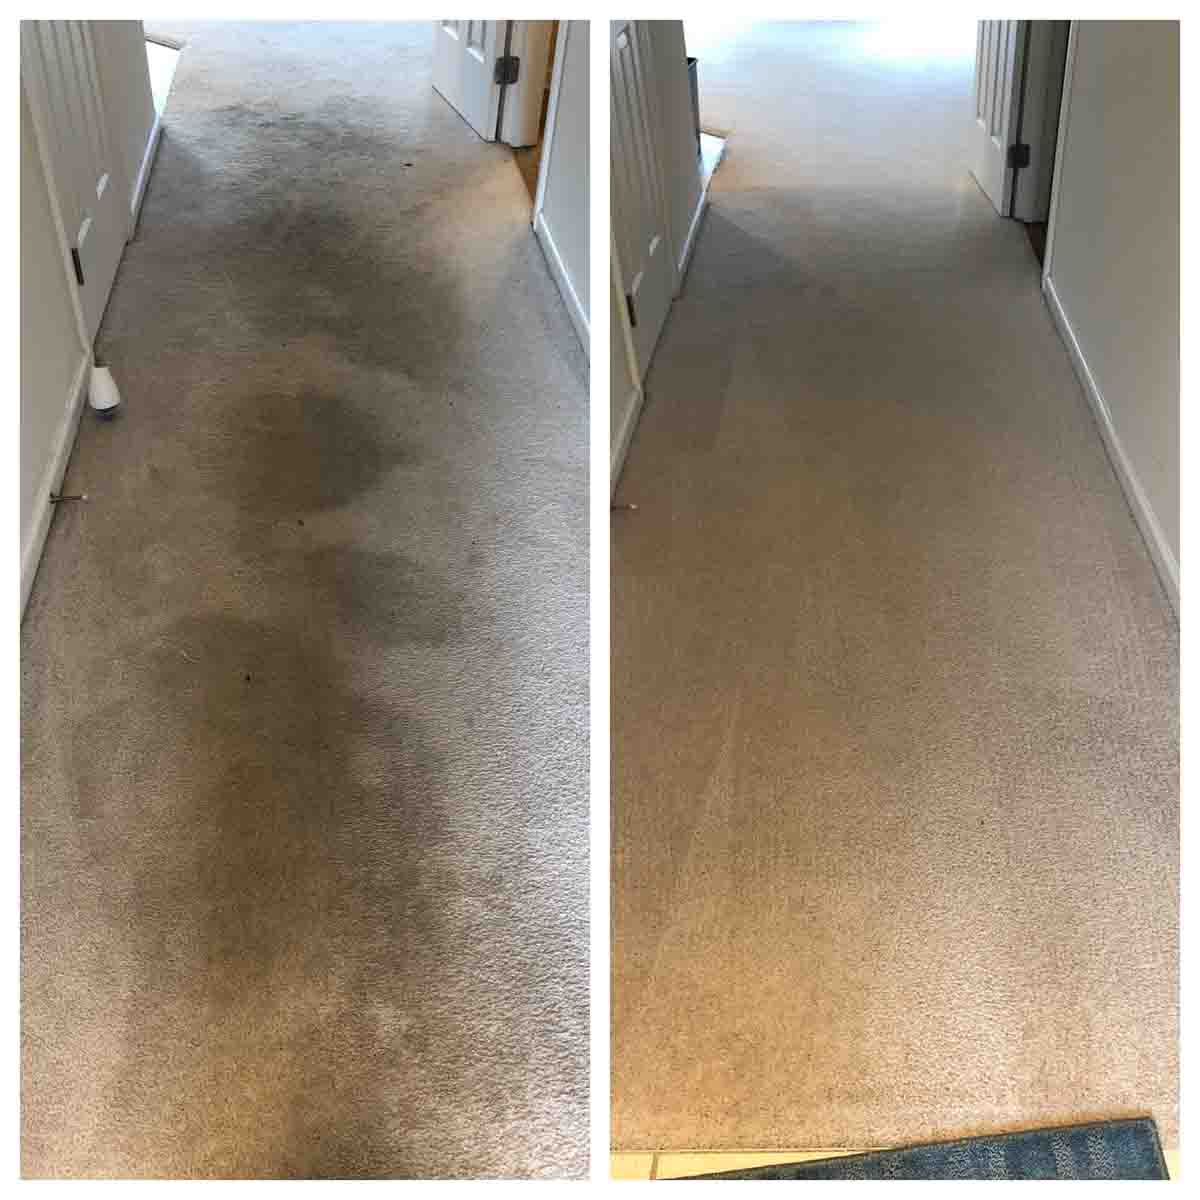 Before and after hallway carpet cleaning — Carpet Cleaning Services in Lexington, KY